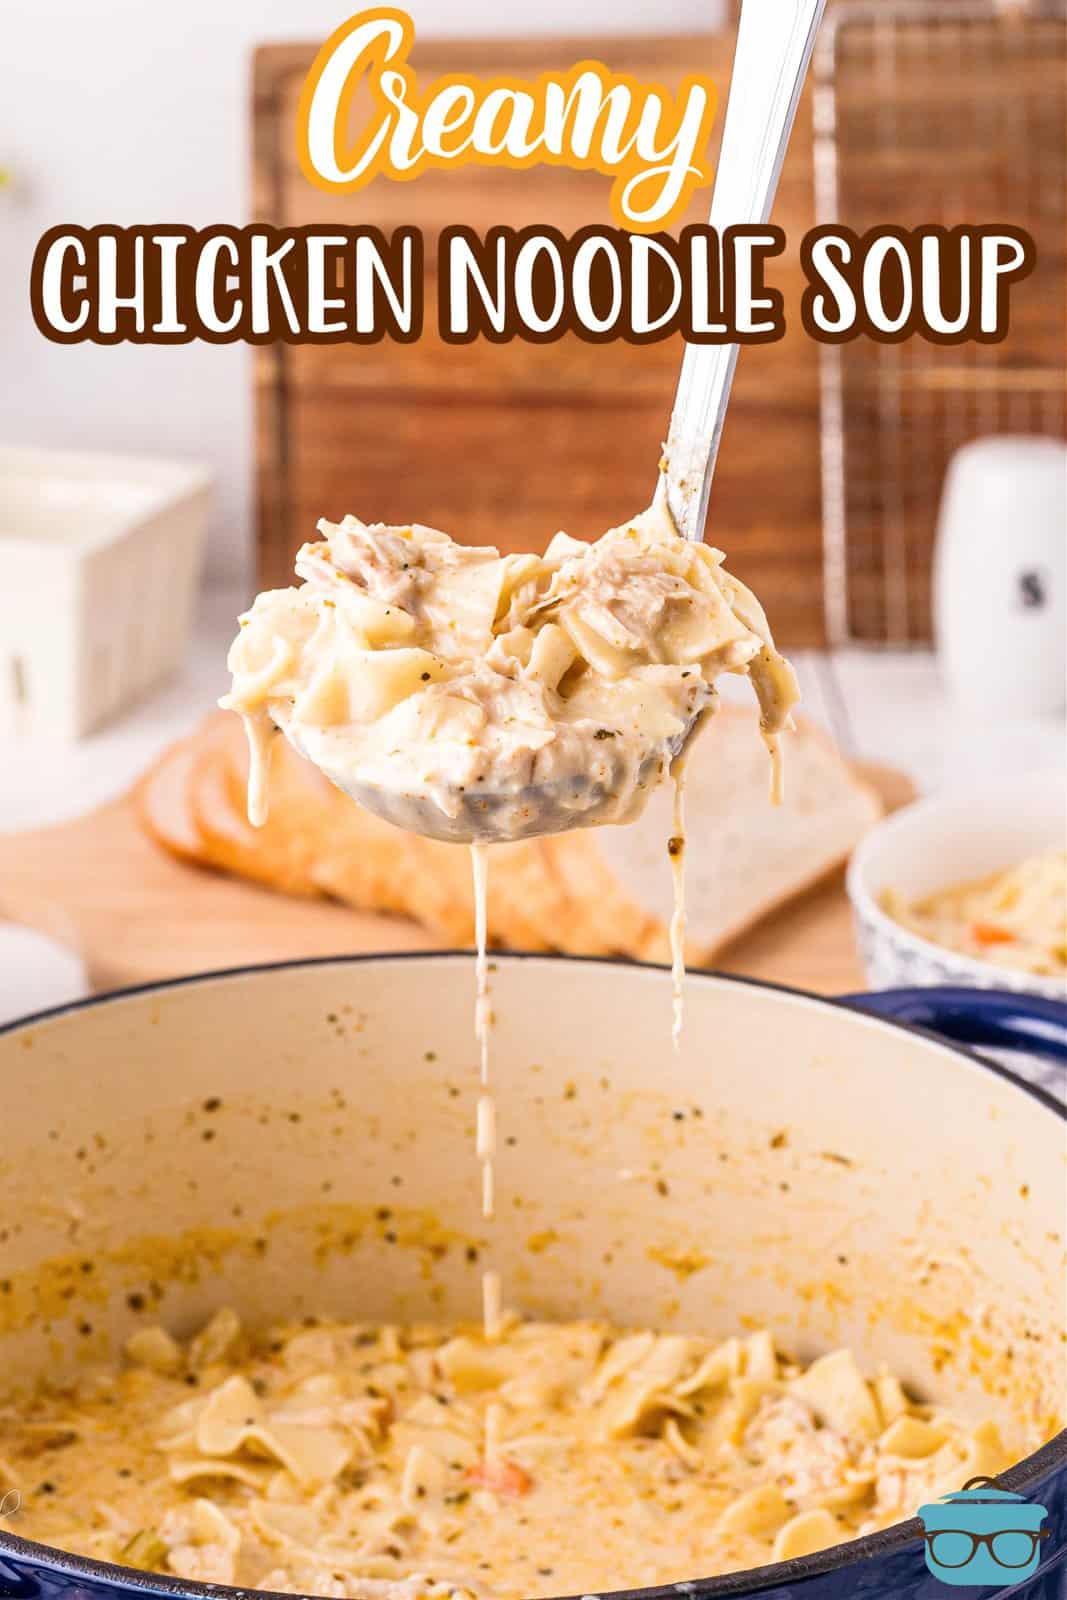 Pinterest image of Creamy Chicken Noodle Soup being lifted up by ladle.